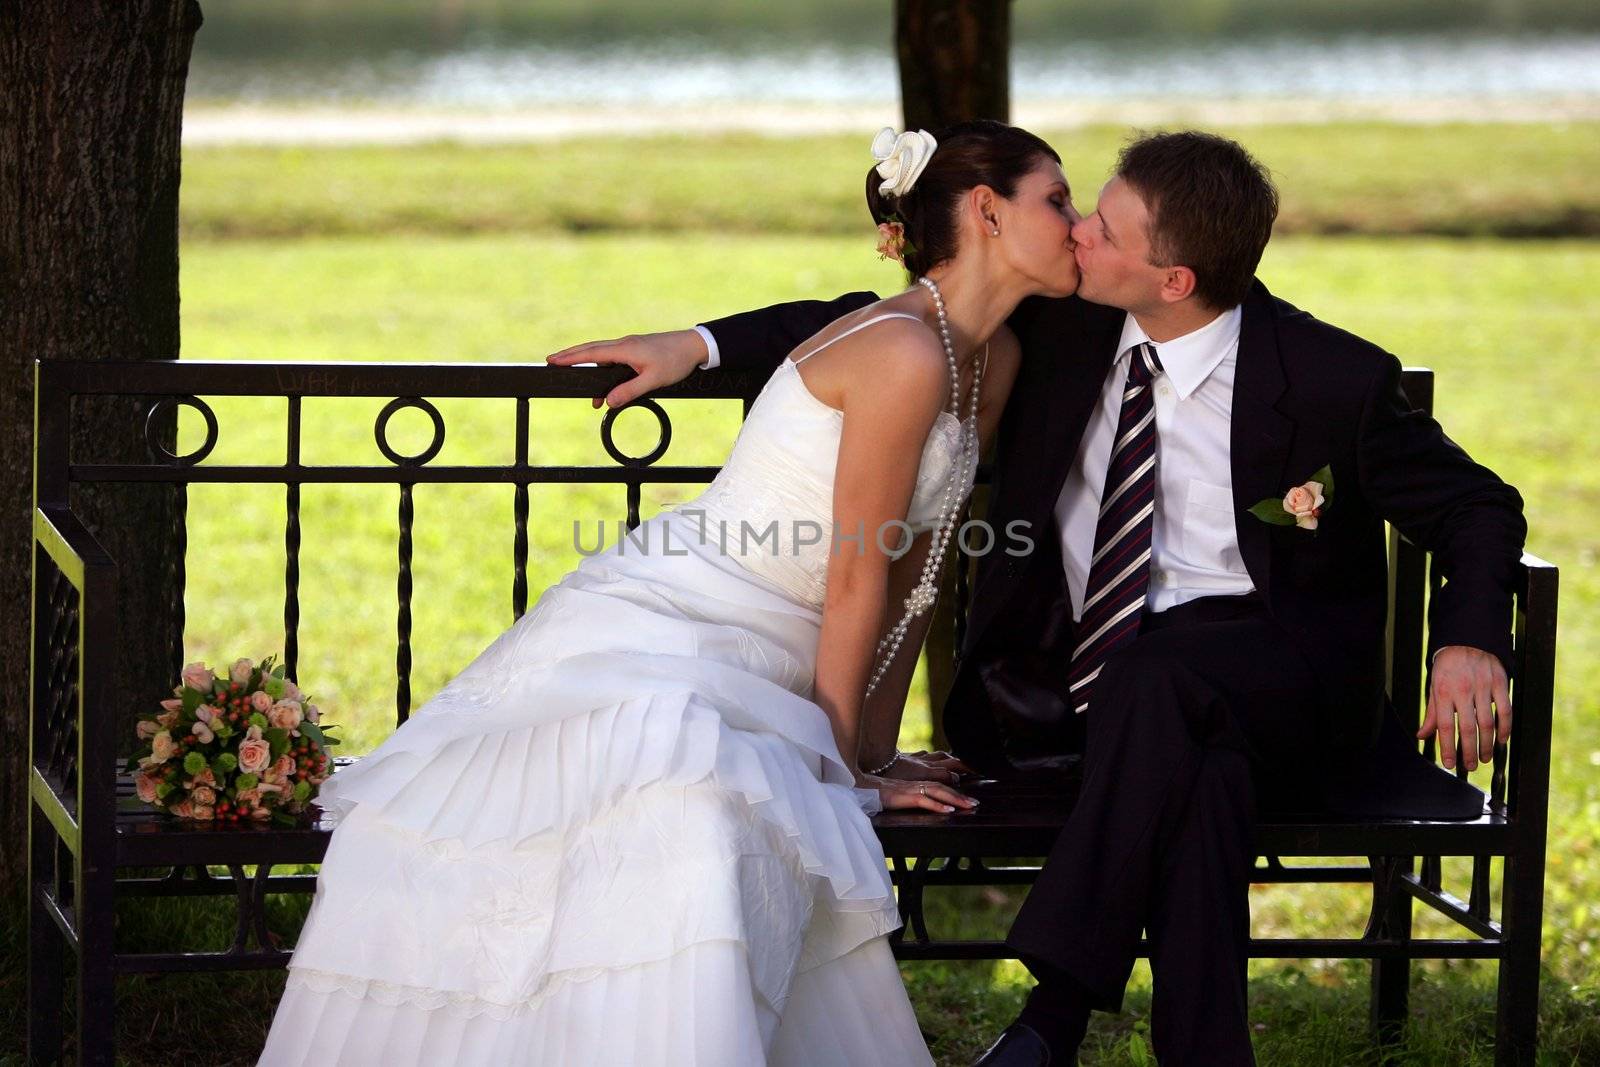 Closeup of happy newlywed couple kissing on park bench outdoors.